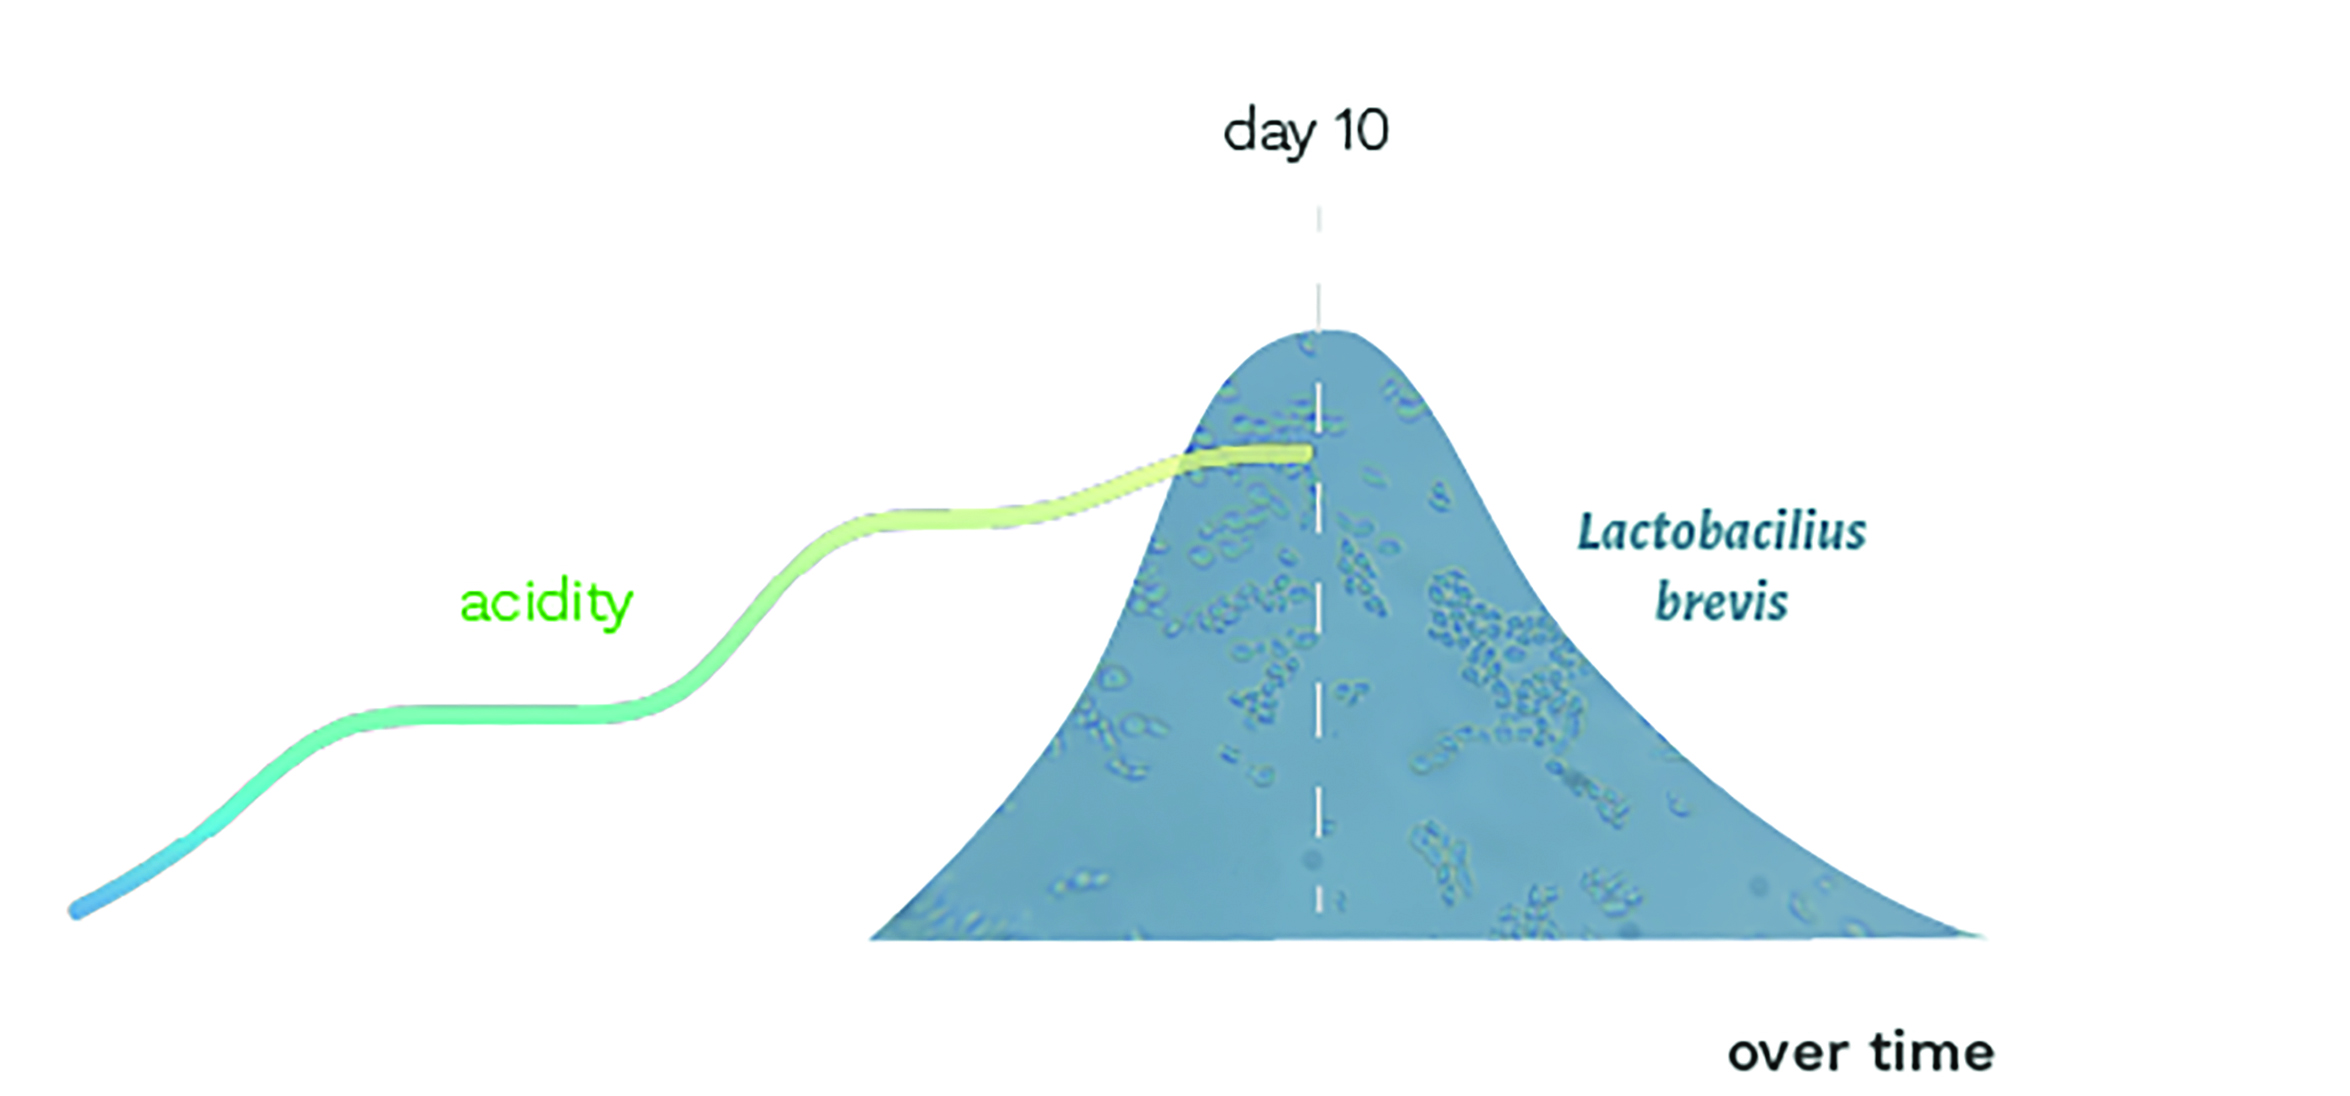 A sketch of acidity increasing over time and maximizing at day 10, during the peak value of Lactobacilius brevis.